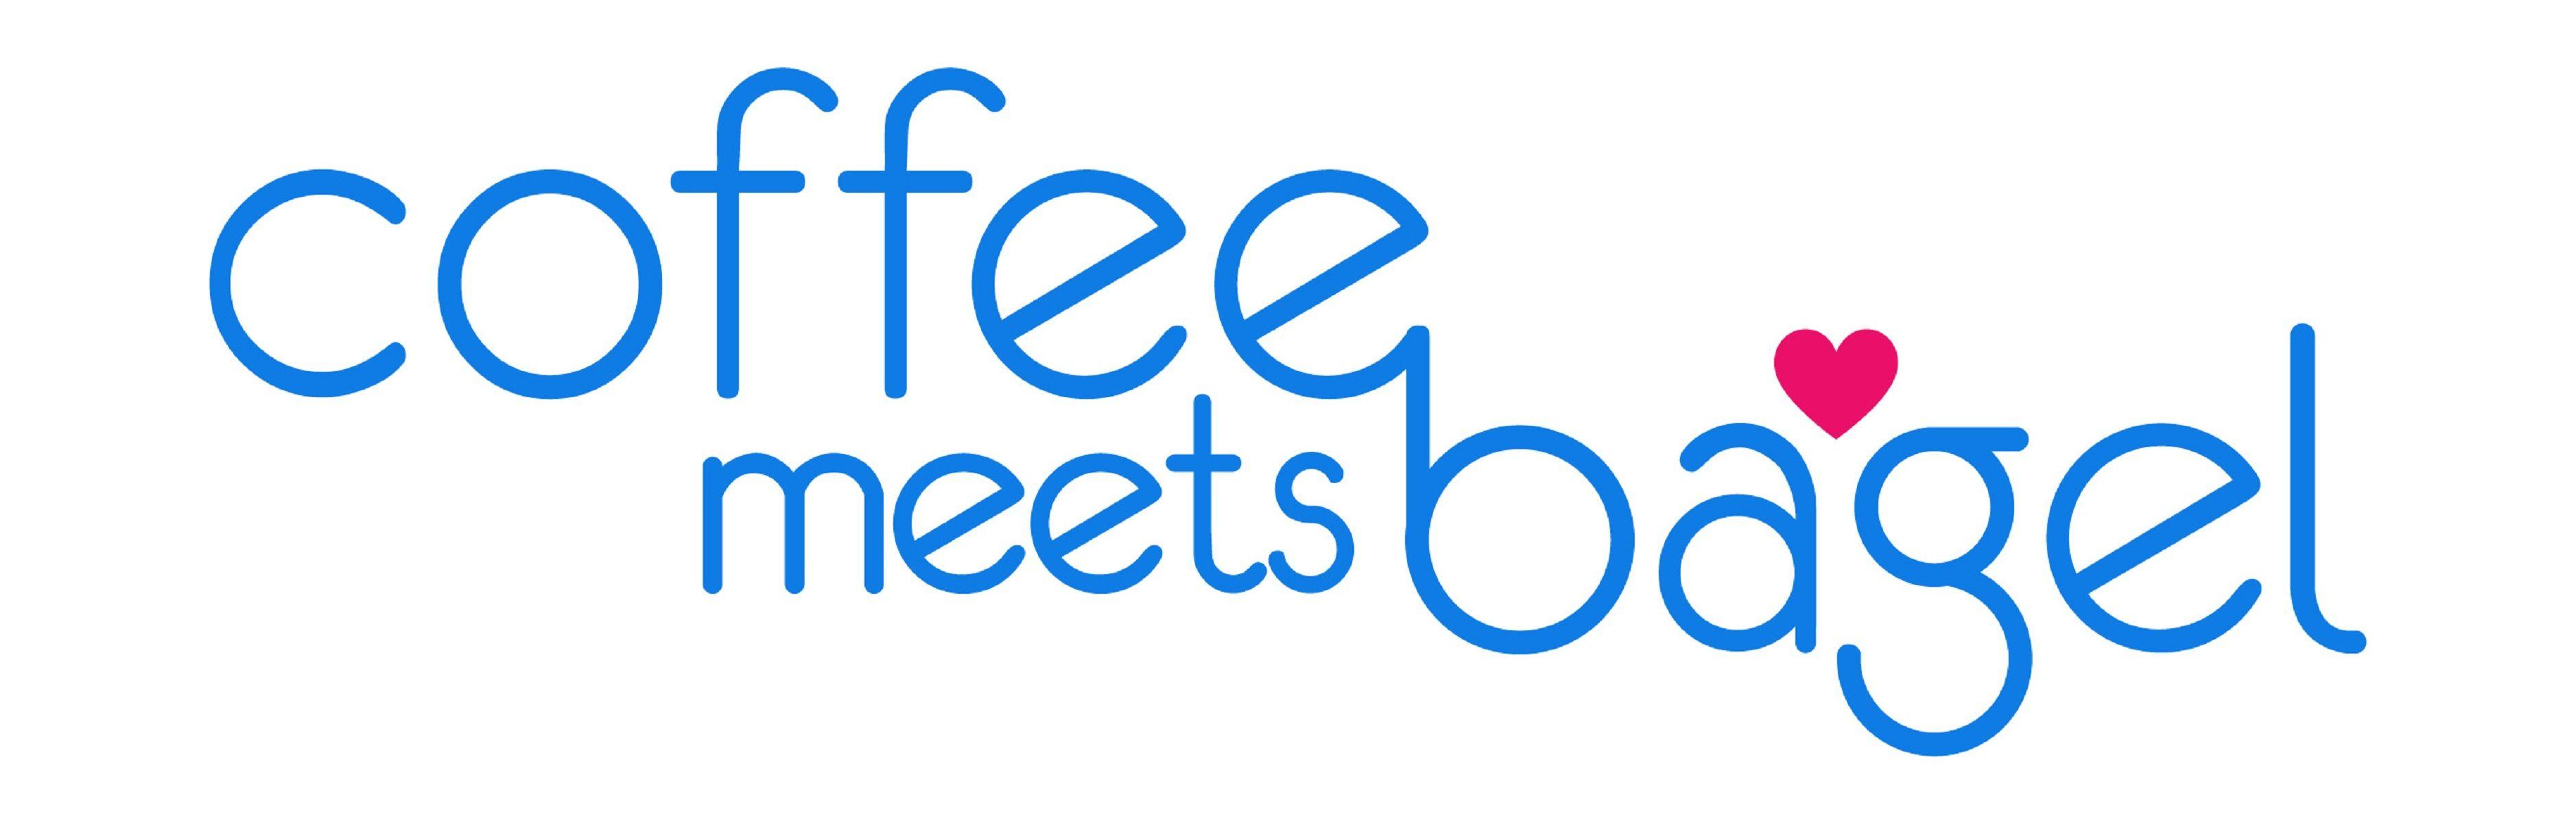 Coffee Meets Bagel Logo - Coffee Meets Bagel Review February 2019 - Scam or real dates ...